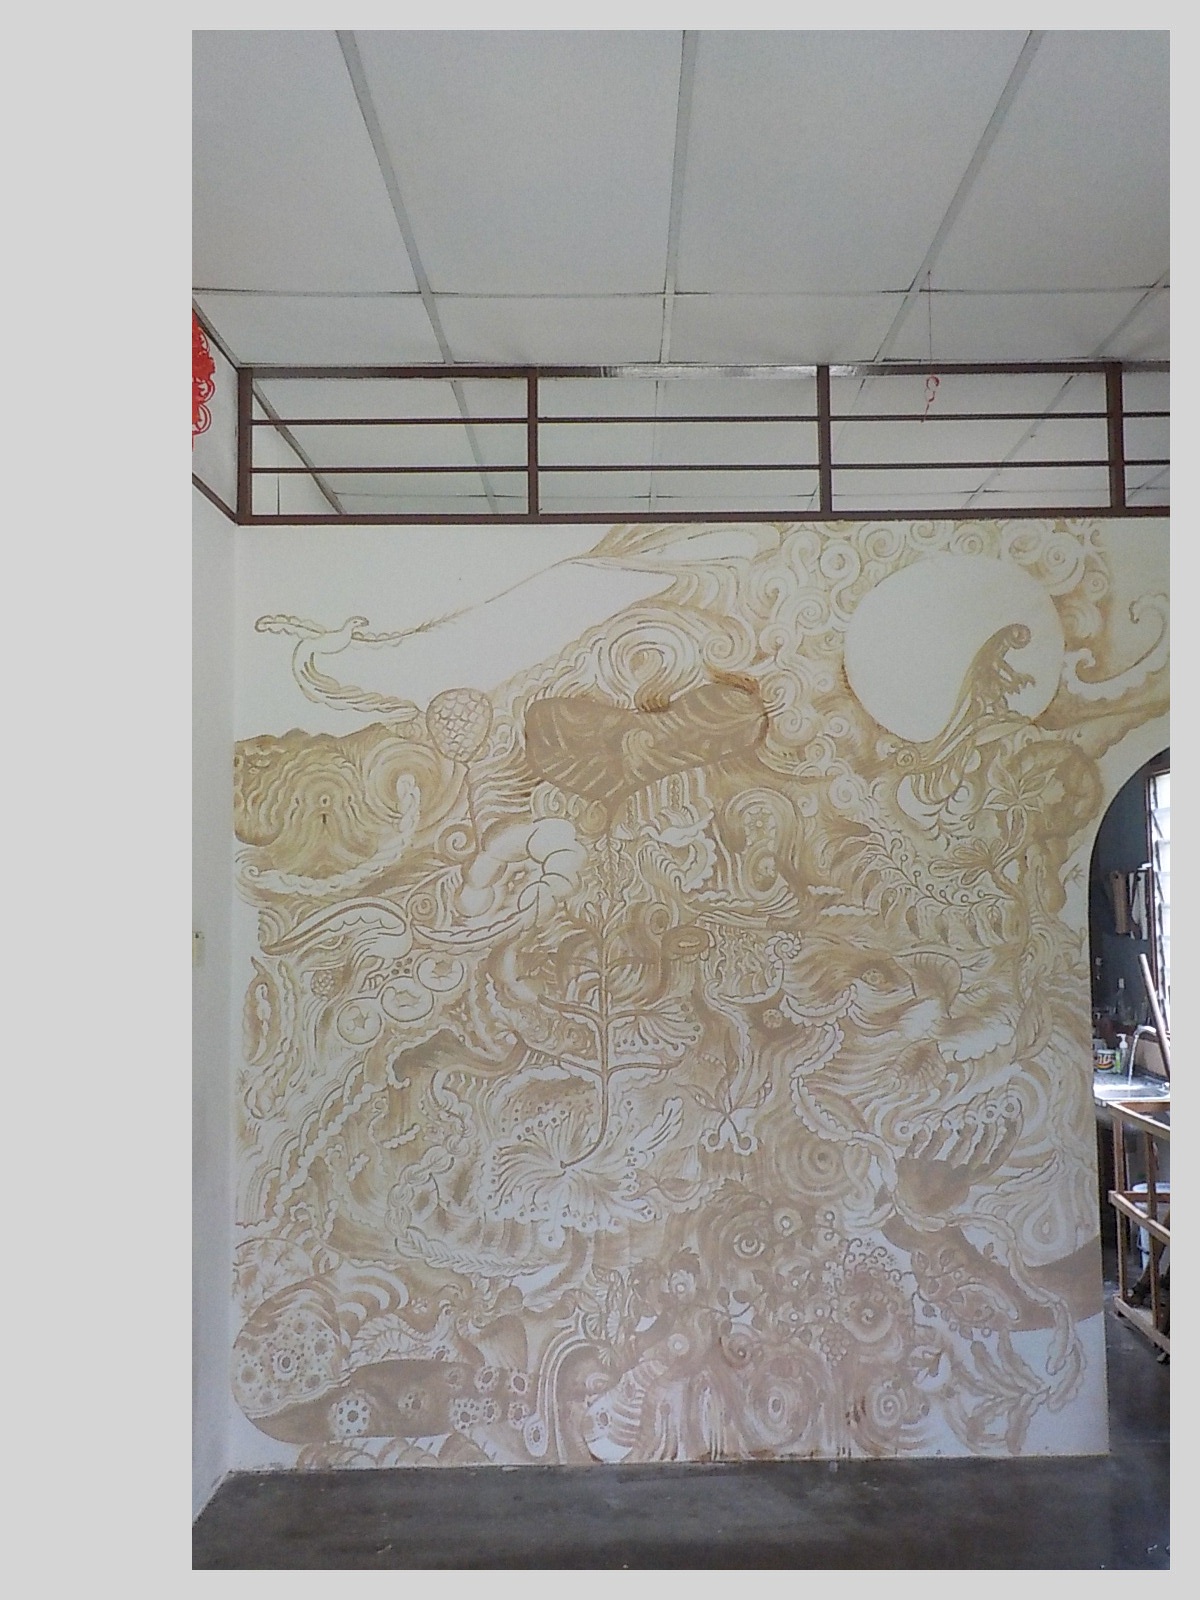 the cray drawing on the wall in 聴水庵_f0117481_7552946.jpg